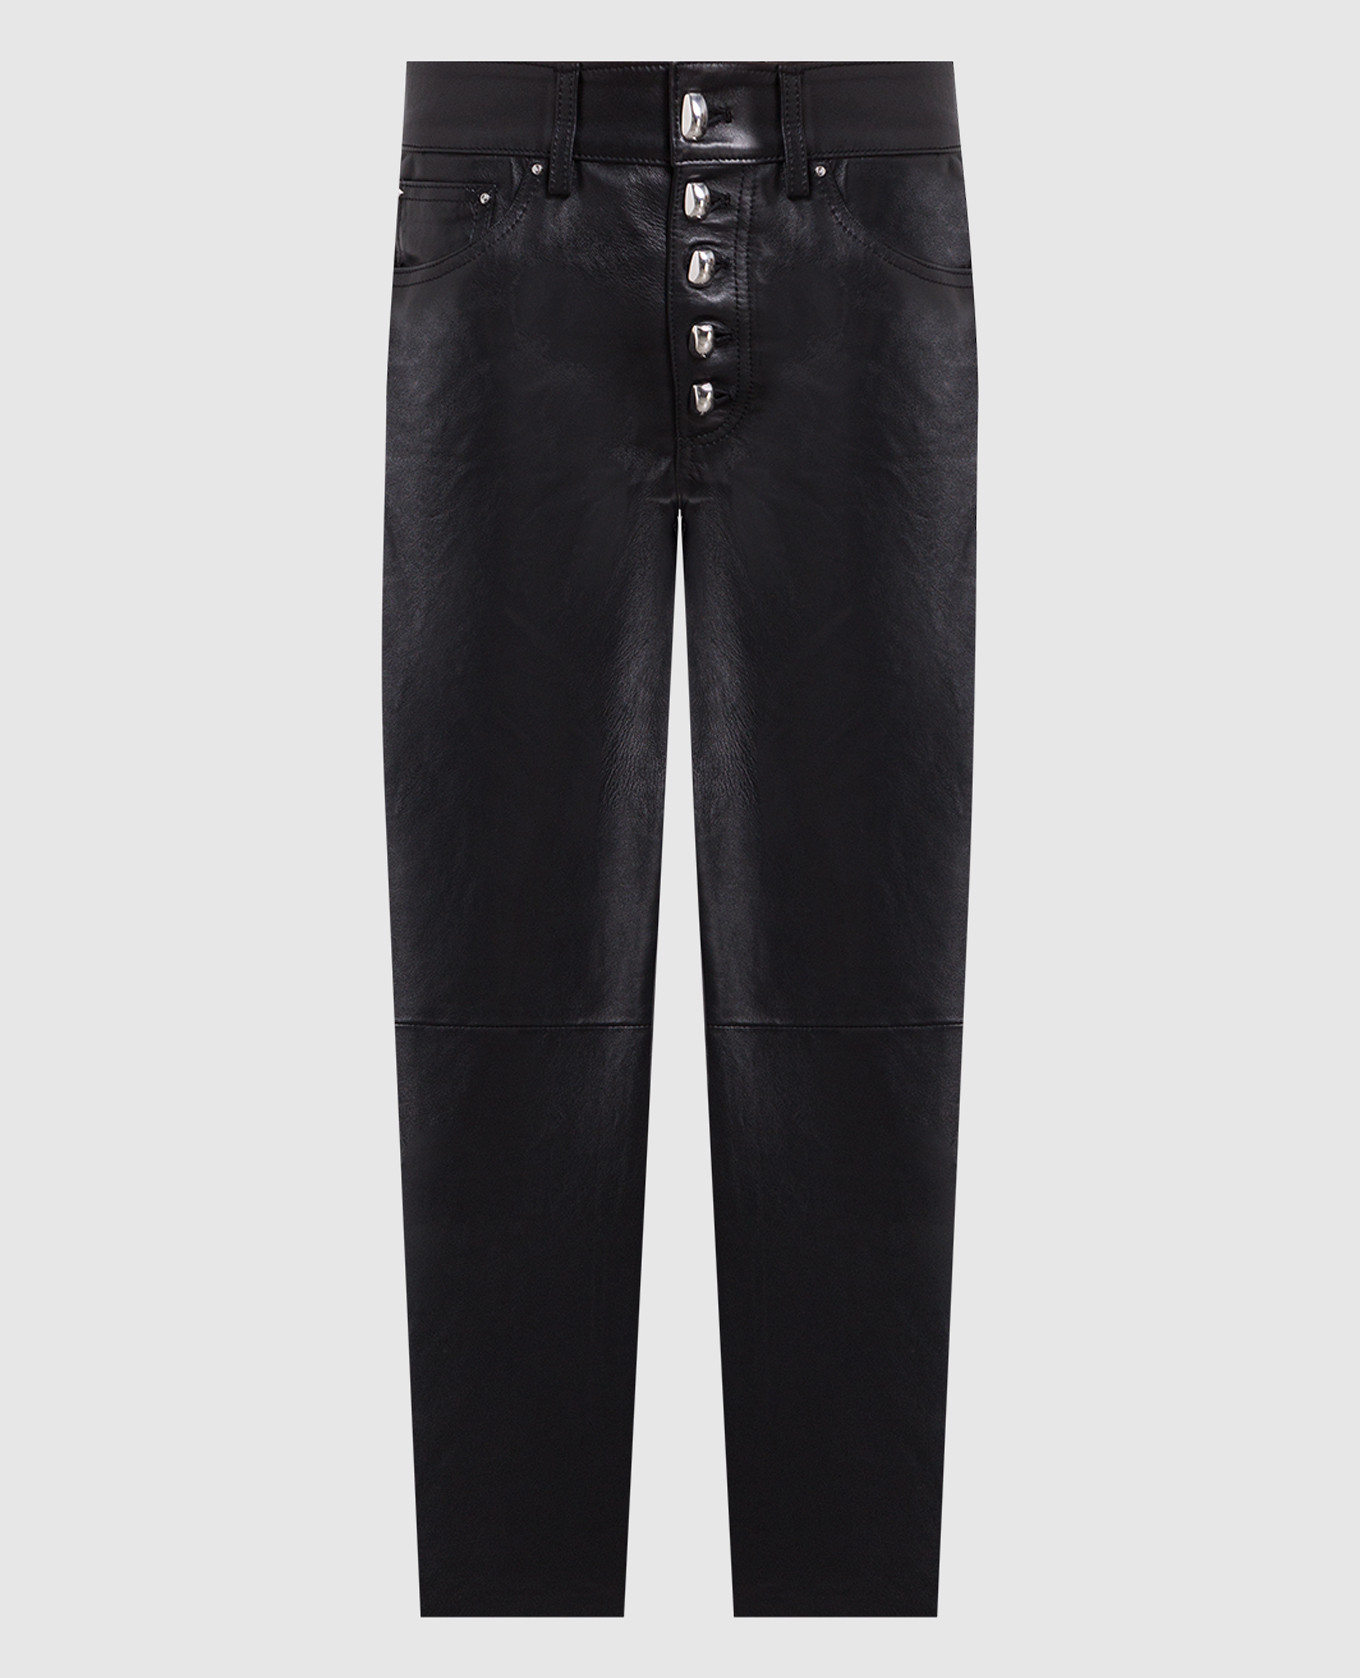 Black leather pants with logo patch